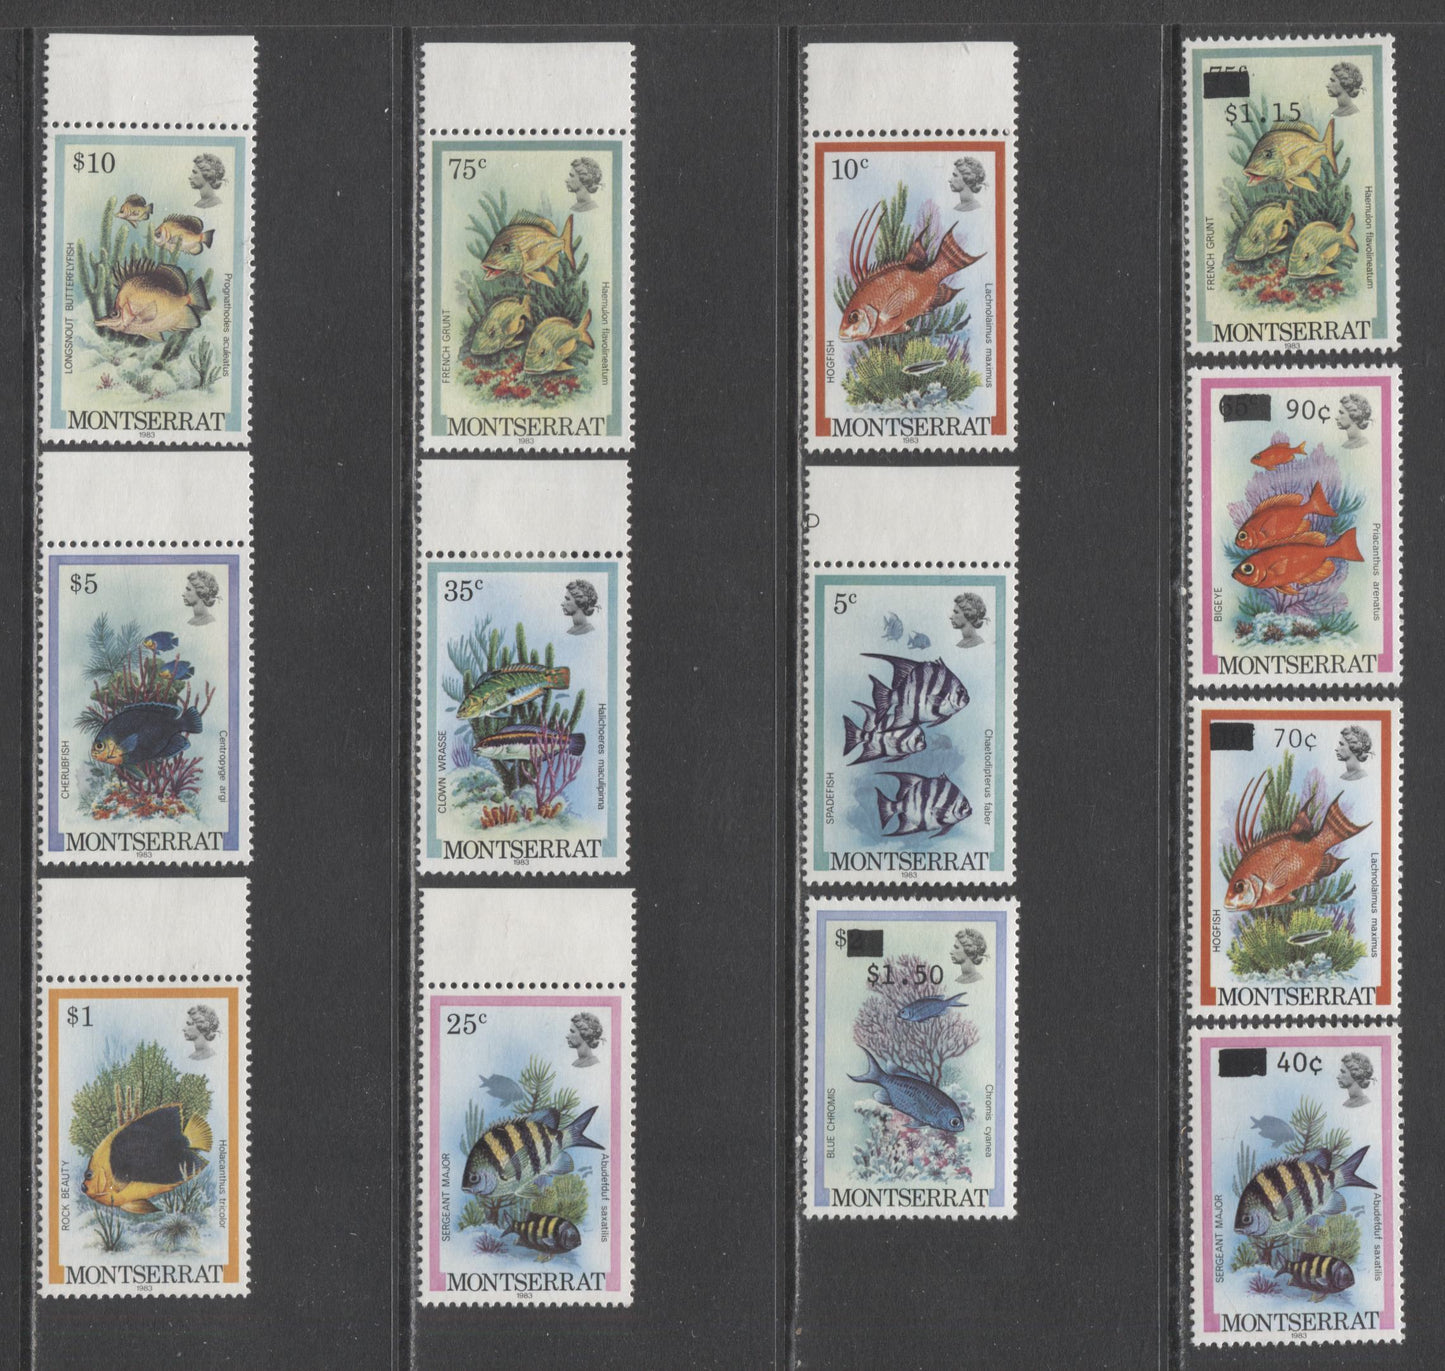 Lot 87 Montserrat SC#445a/515 1983 Inscribed & Surcharged Fish Issues, 13 VFOG Singles, Click on Listing to See ALL Pictures, 2017 Scott Cat. $18.55